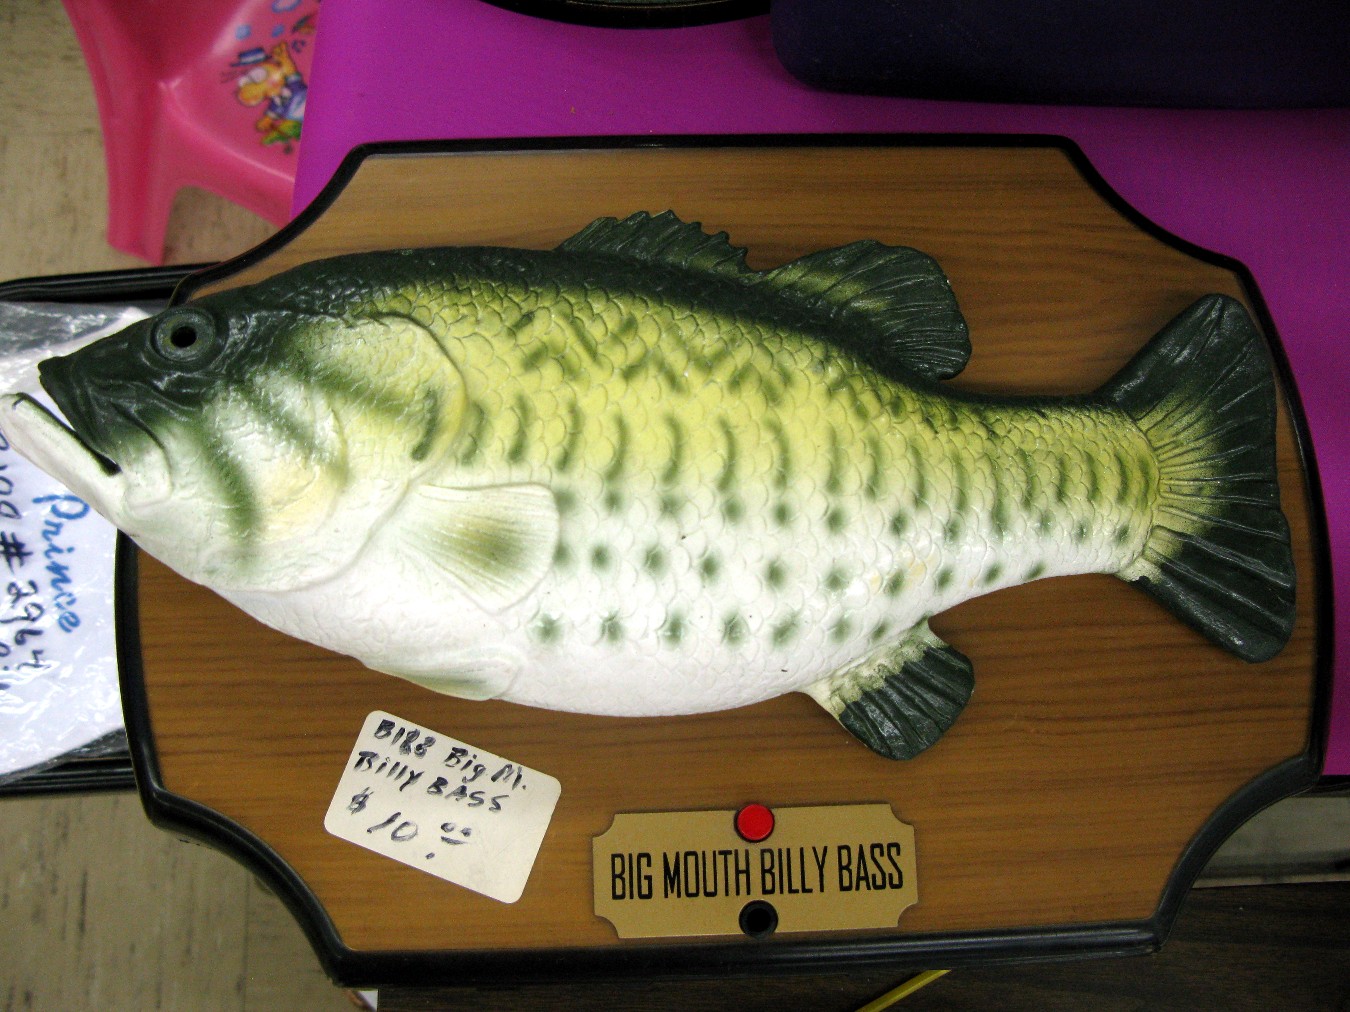 Close-up color photograph of a rubber fish above a red button and a nameplate that says “Big Mouth Billy Bass.” A price tag adorns the plaque the fish is mounted on.